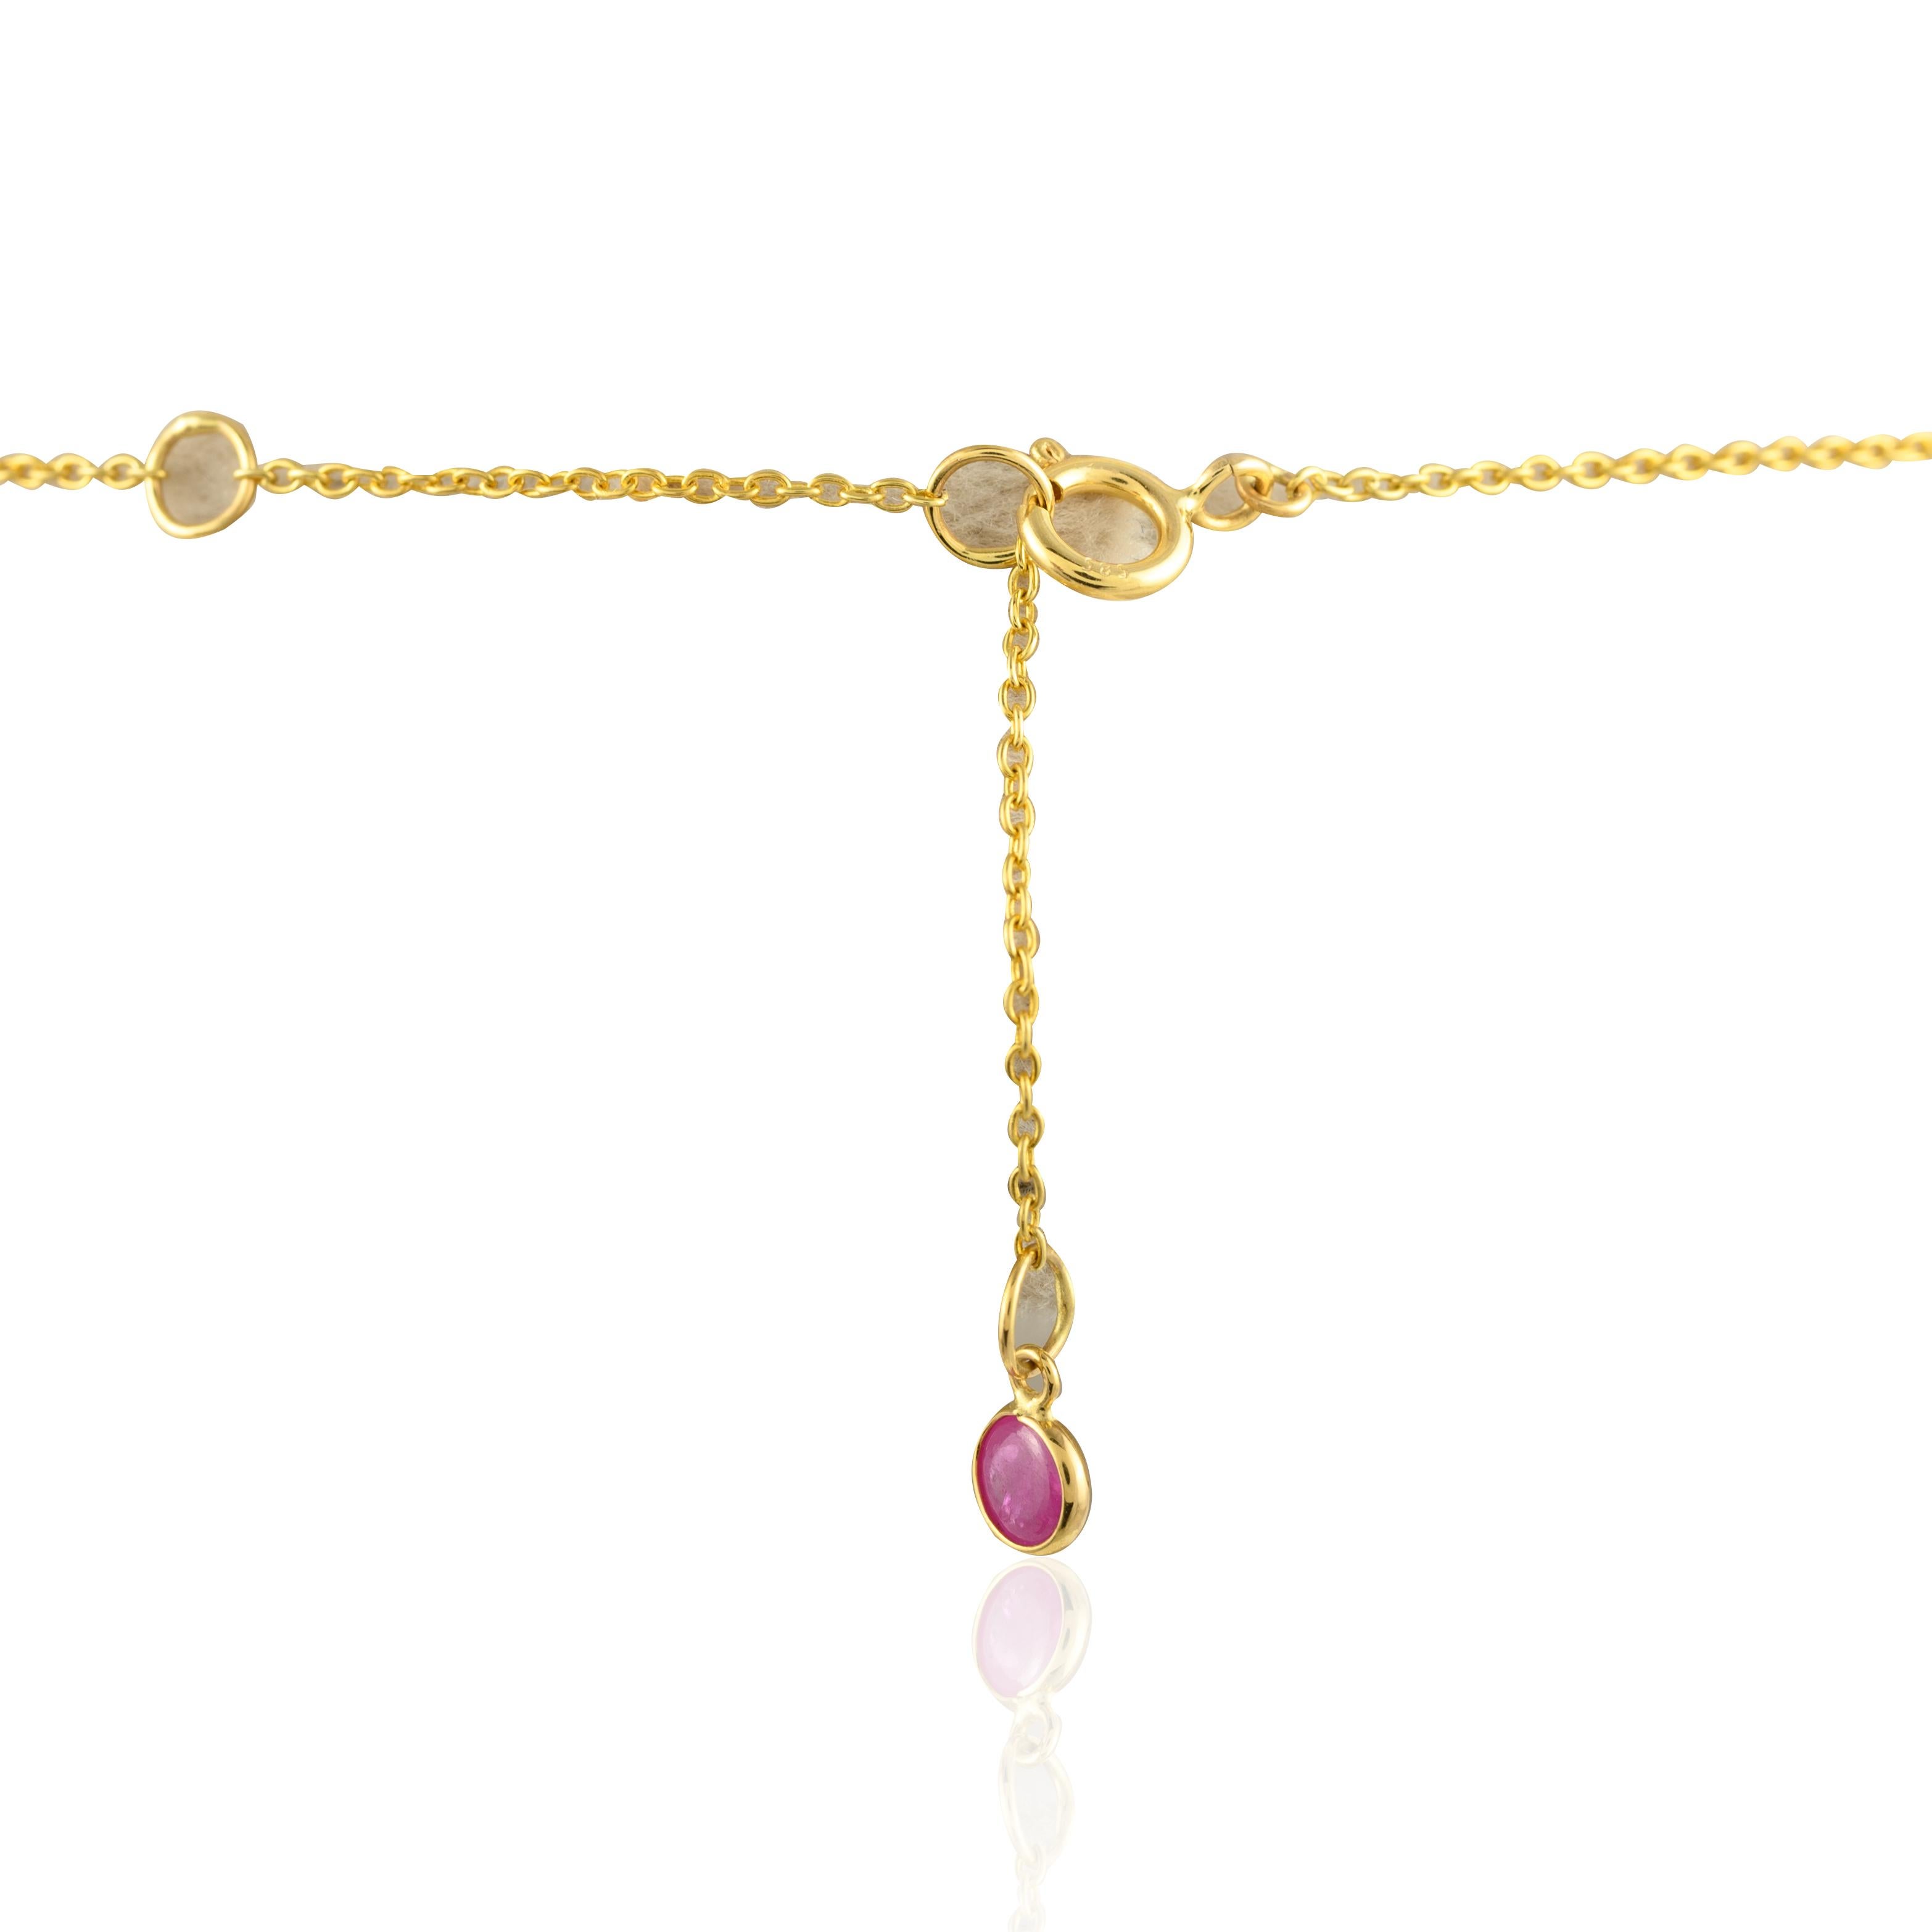 Real Ruby Station Chain Necklace 14k Solid Yellow Gold, Christmas Gift For Her For Sale 1